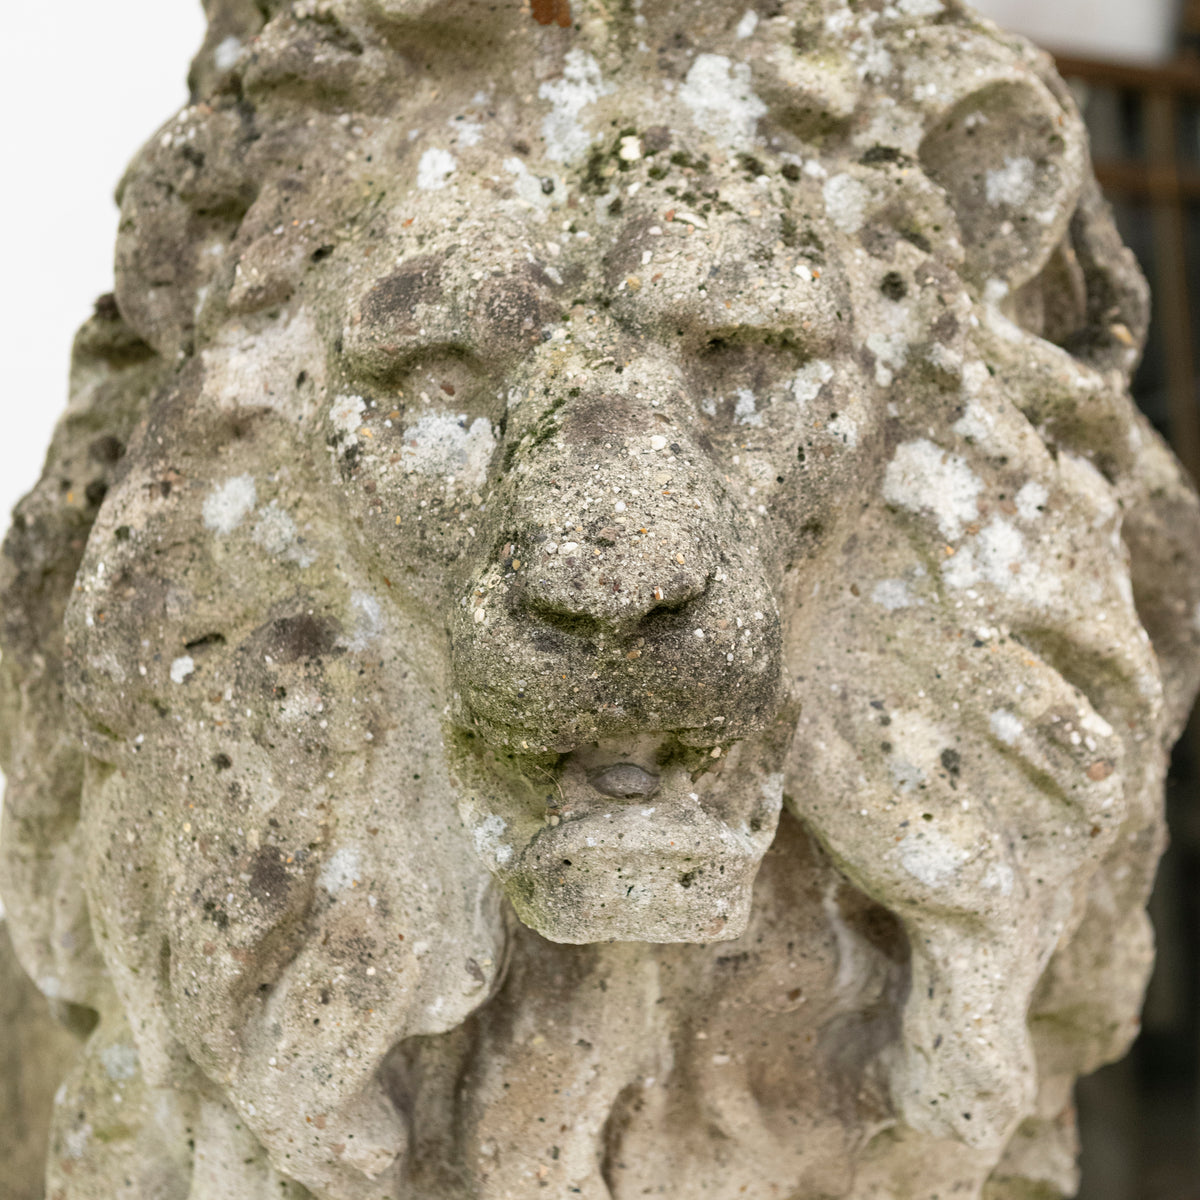 Pair of Monumental Reclaimed Stone Lions | The Architectural Forum